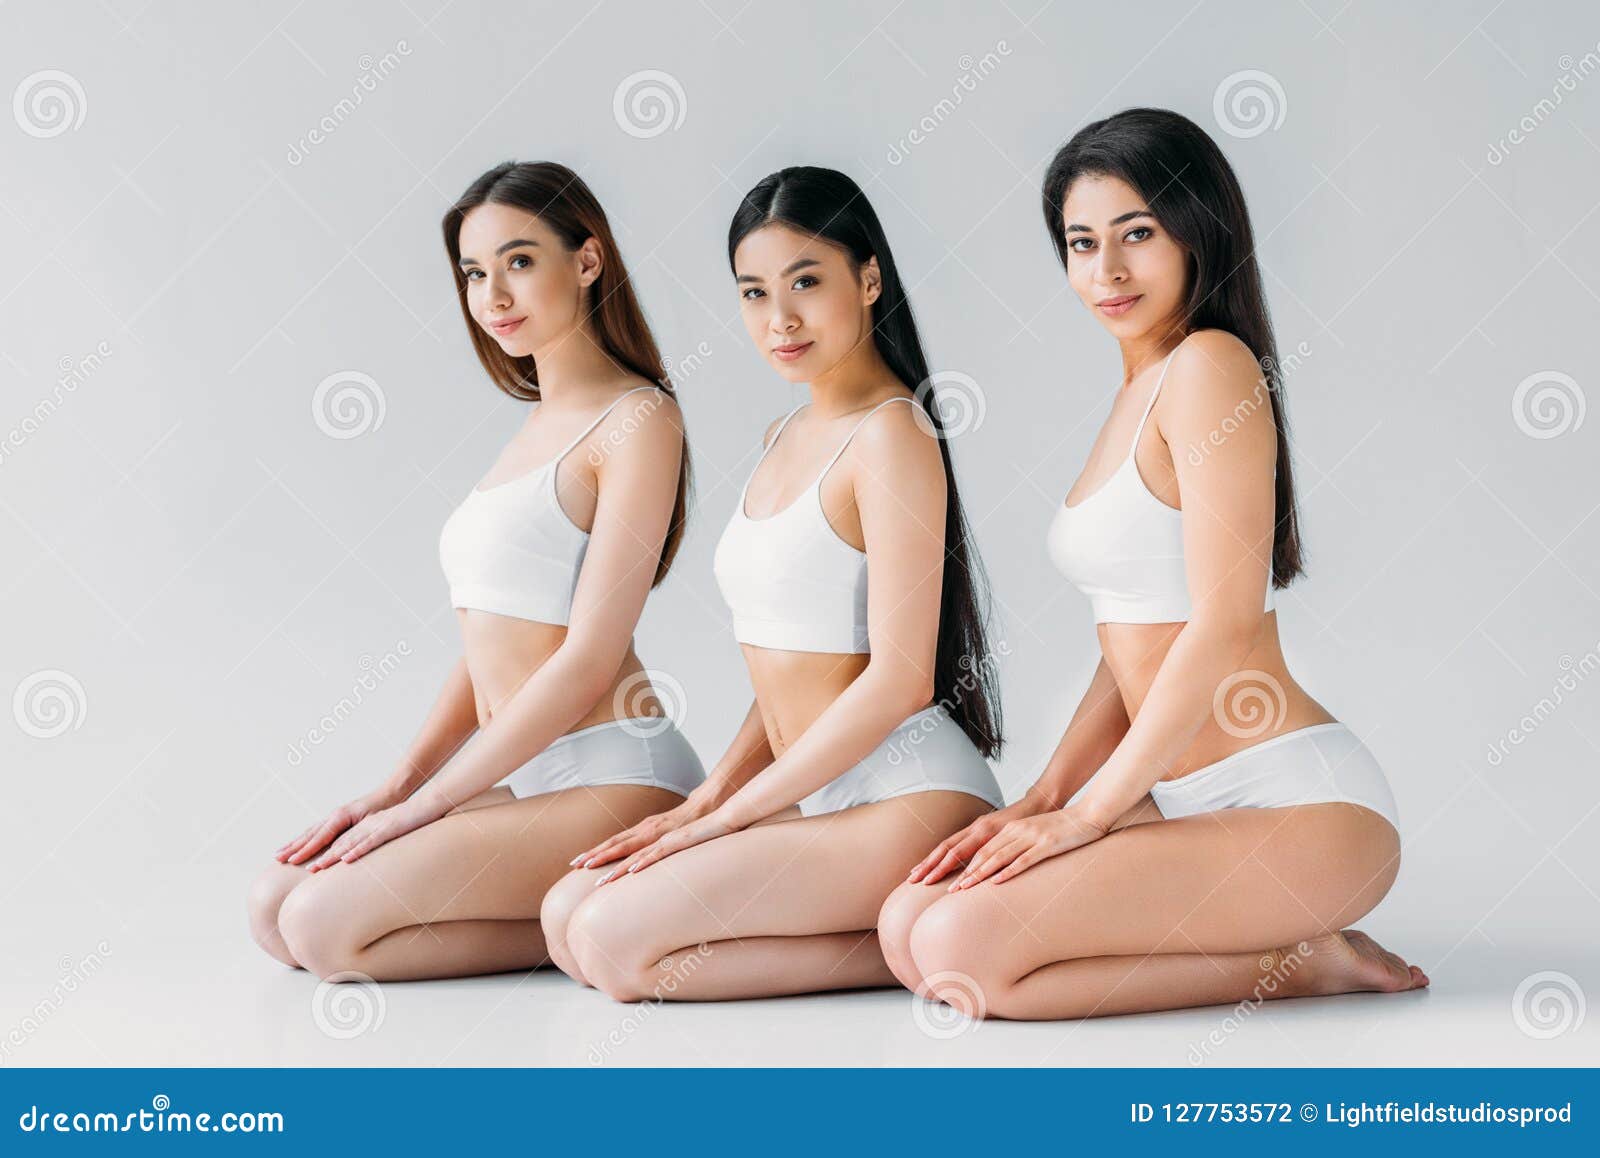 267 Multicultural Underwear Stock Photos - Free & Royalty-Free